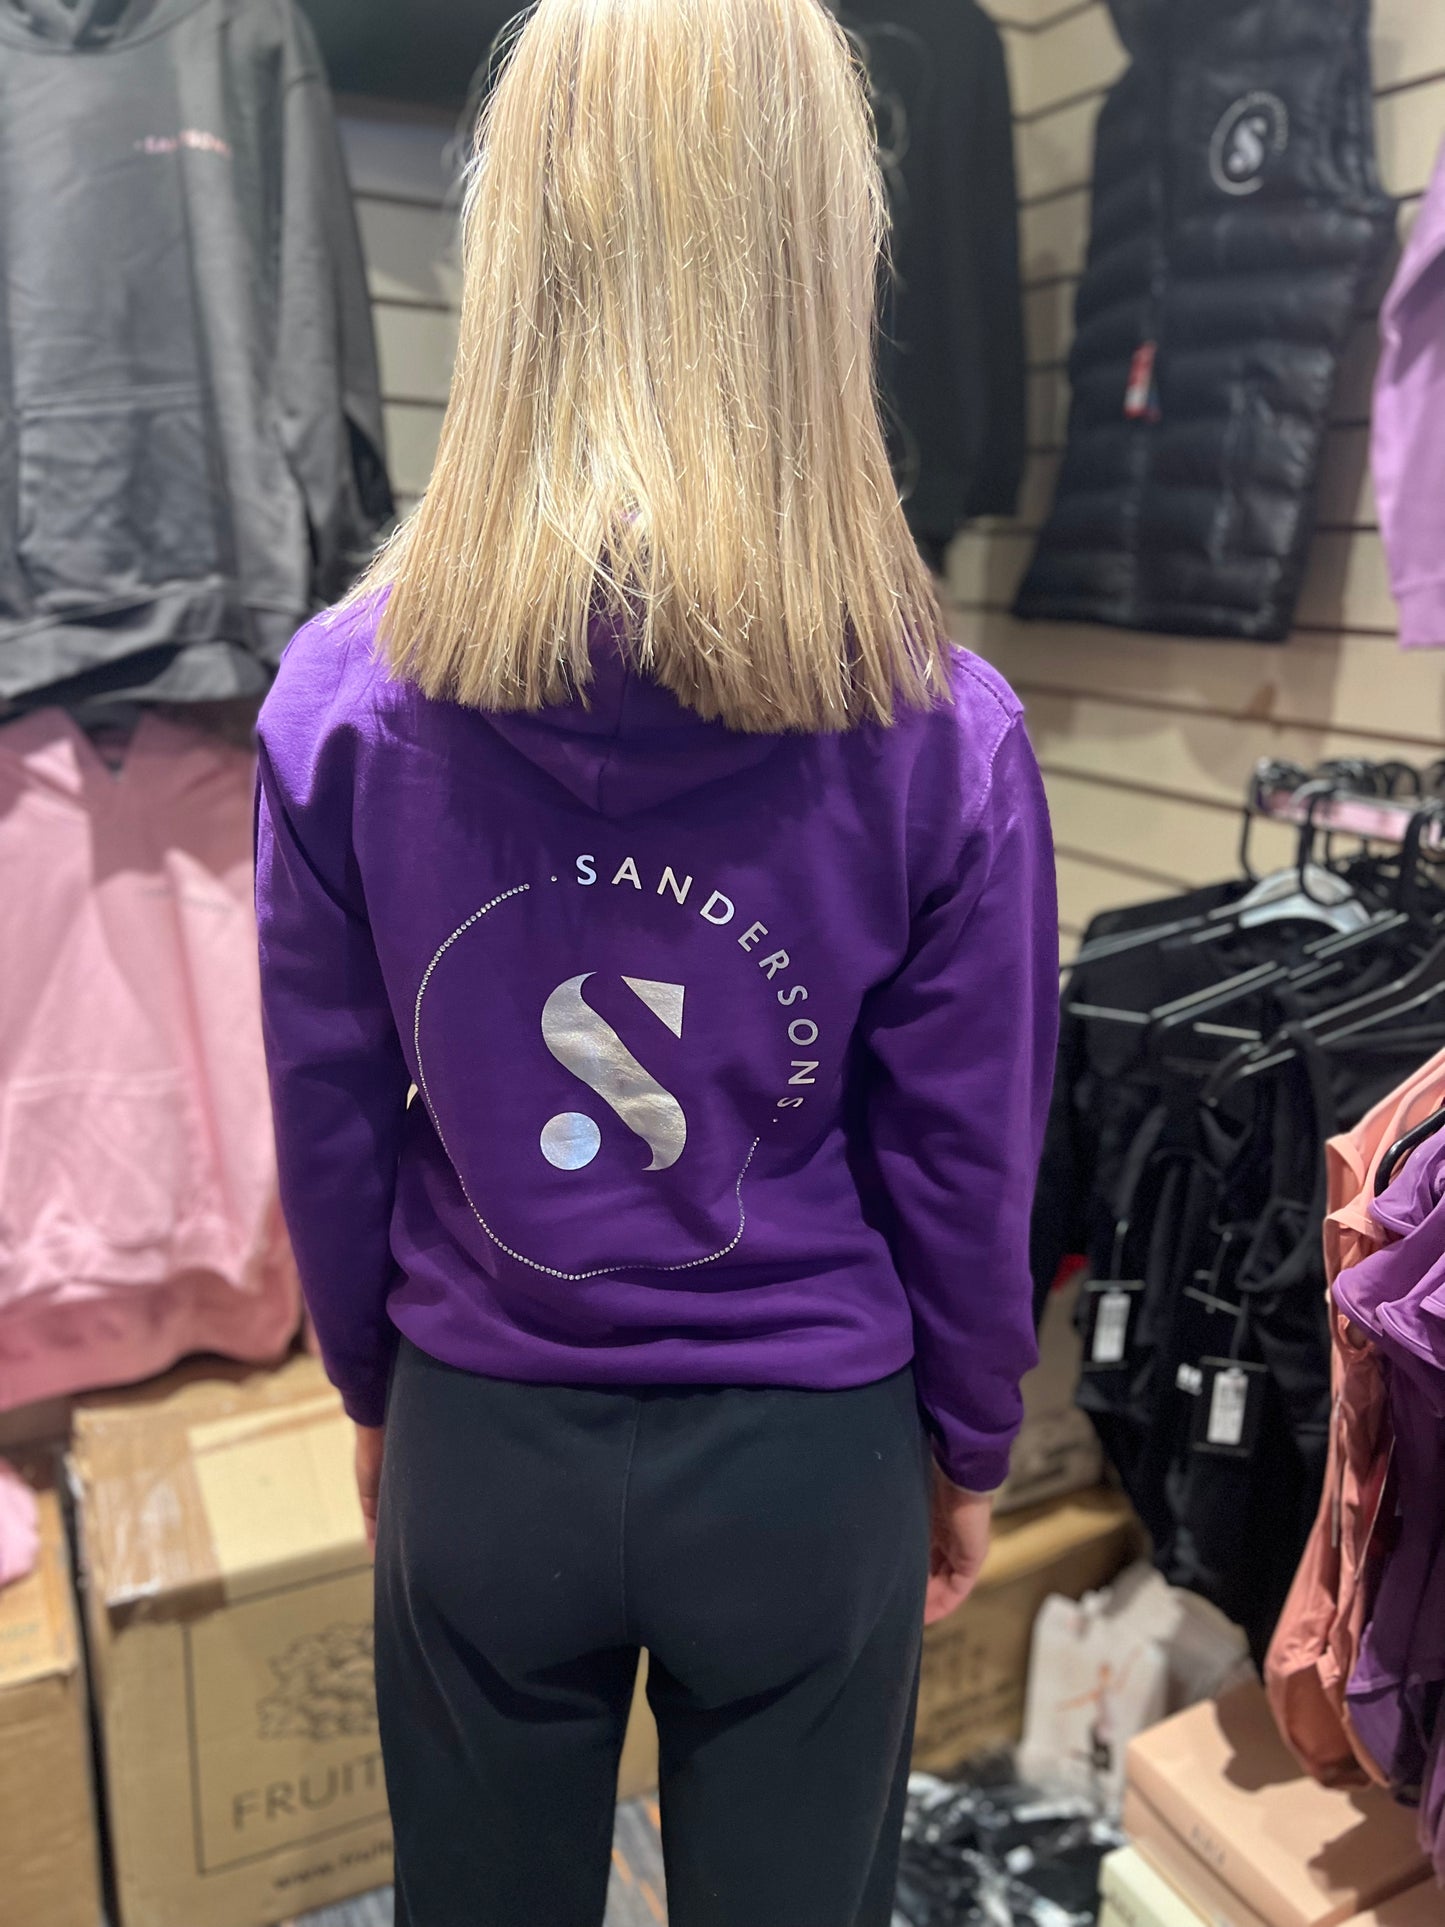 KIDS SIZES PURPLE SANDERSONS PULLOVER HOODIE BY AXZNT WITH METALLIC SILVER BADGE PRINT AND LARGE METALLIC SILVER PRINT & STONES